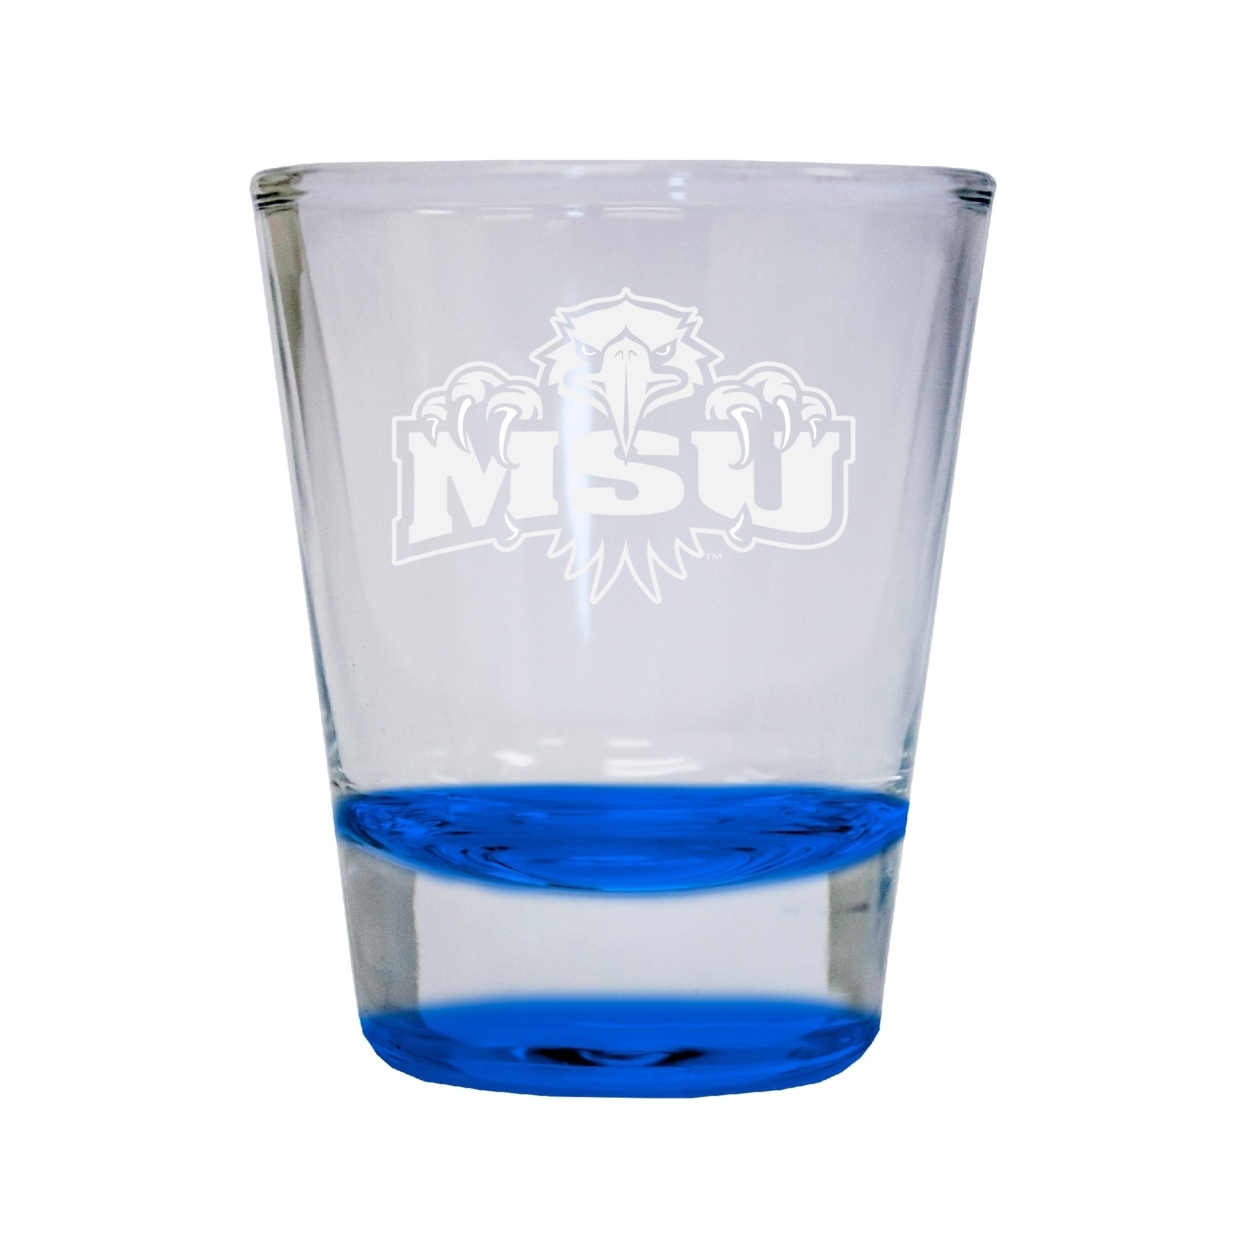 Morehead State University Etched Round Shot Glass 2 Oz Blue